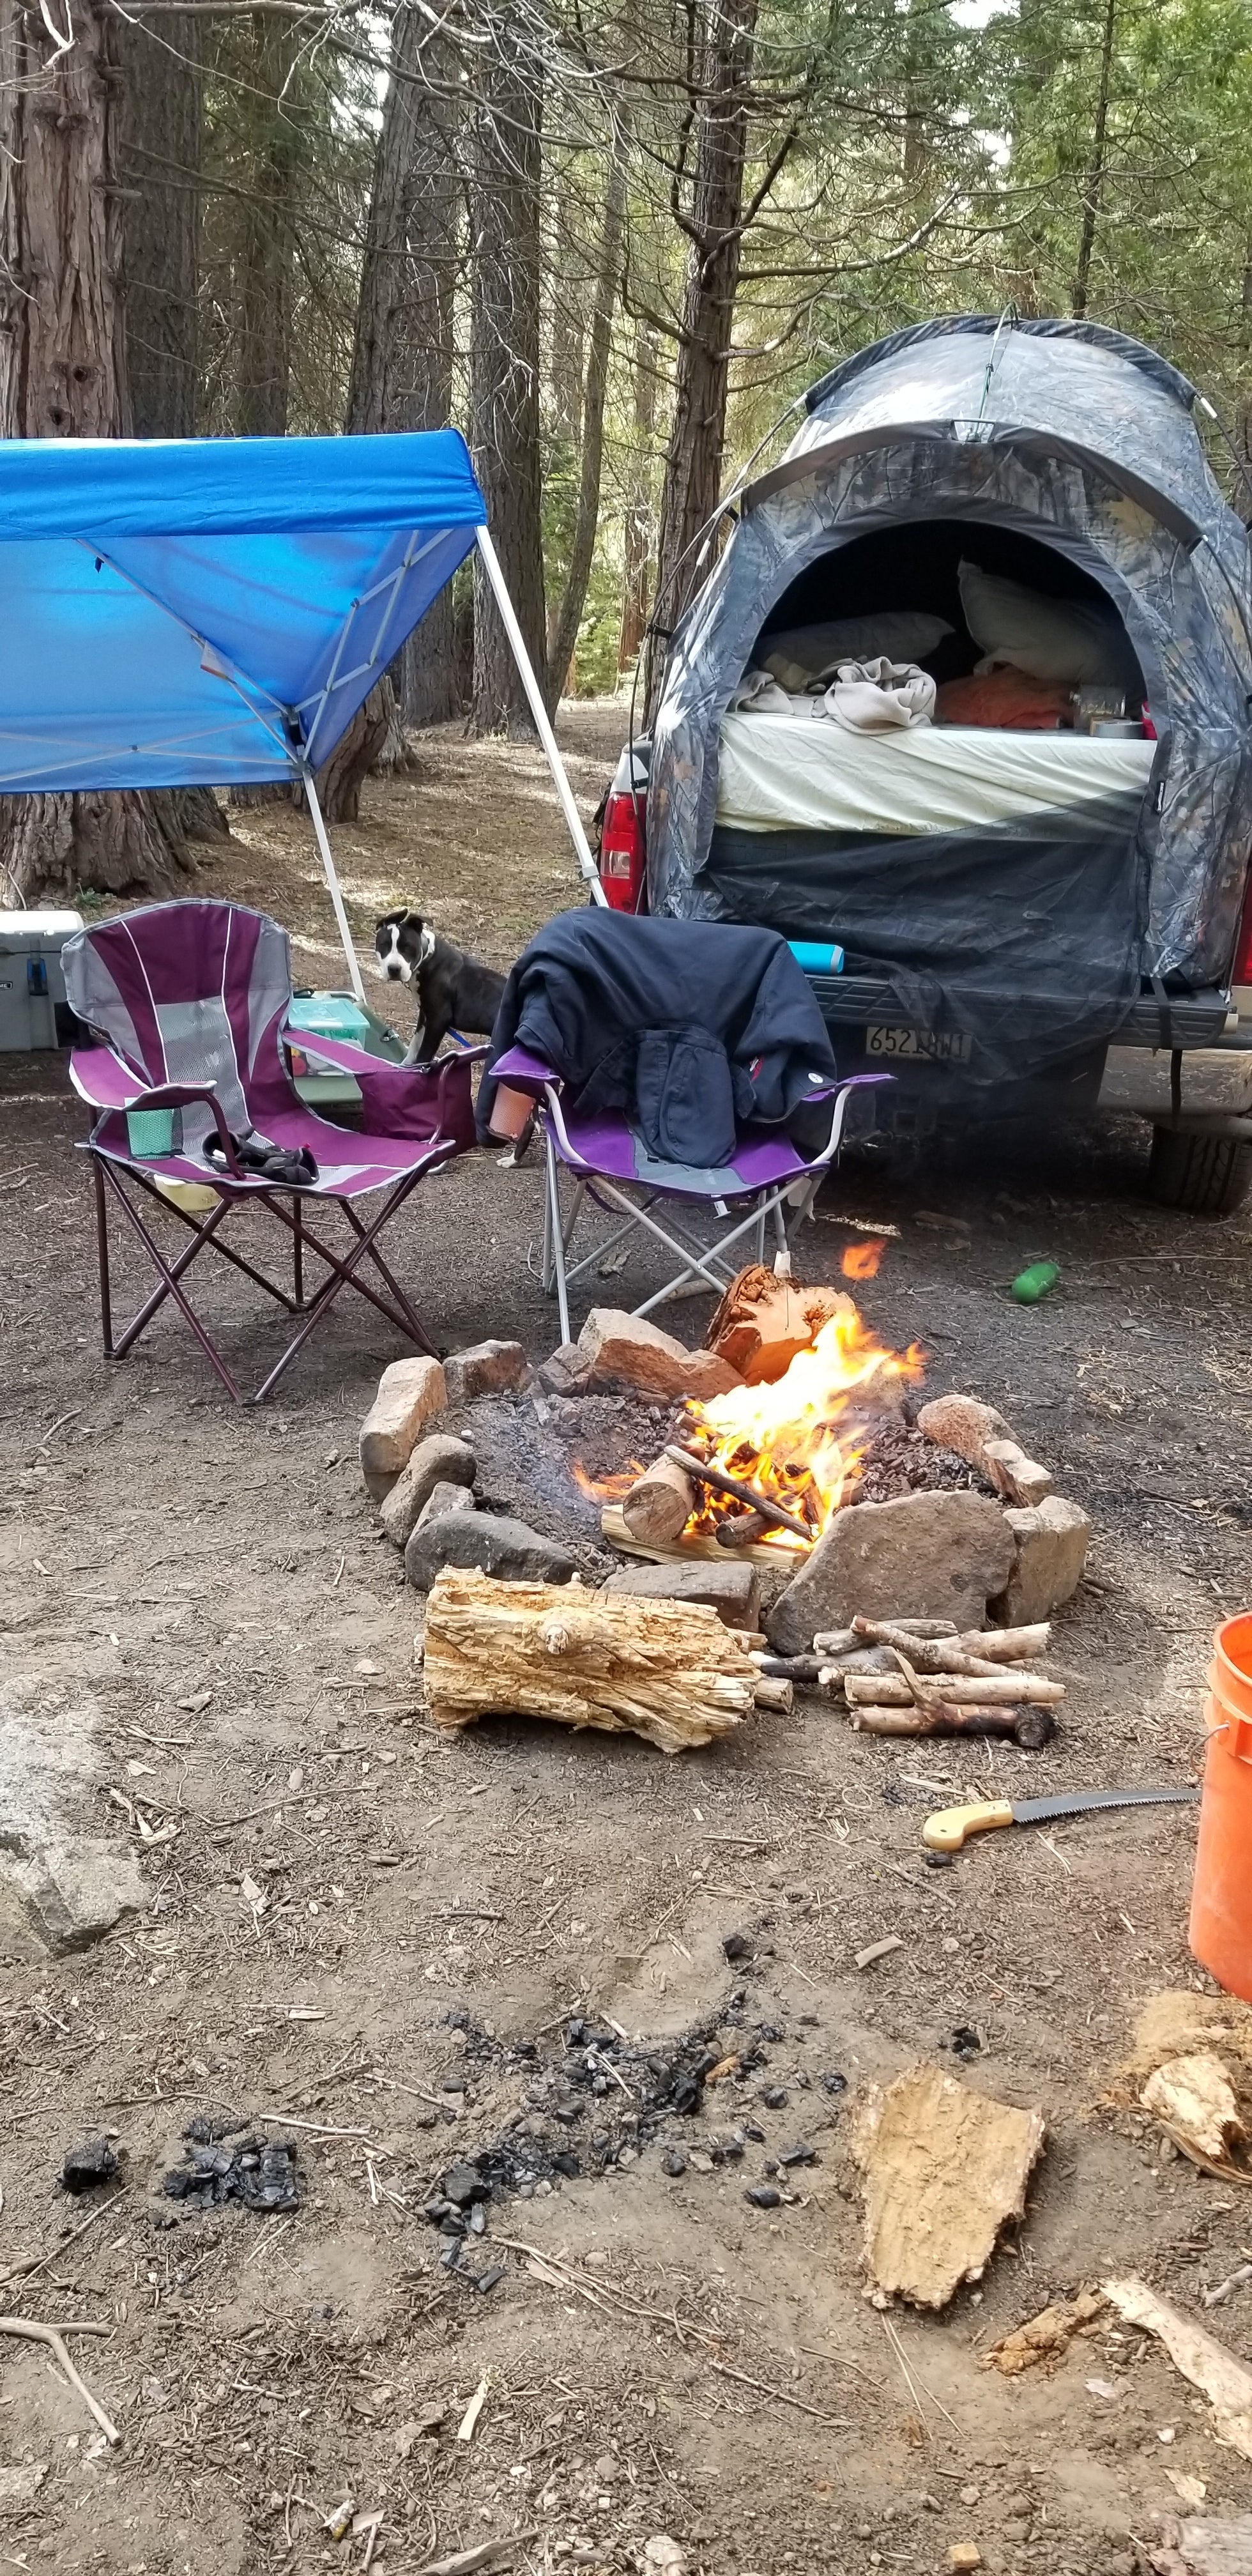 Camper submitted image from Dispersed Camp near Sequoia National Park - 1